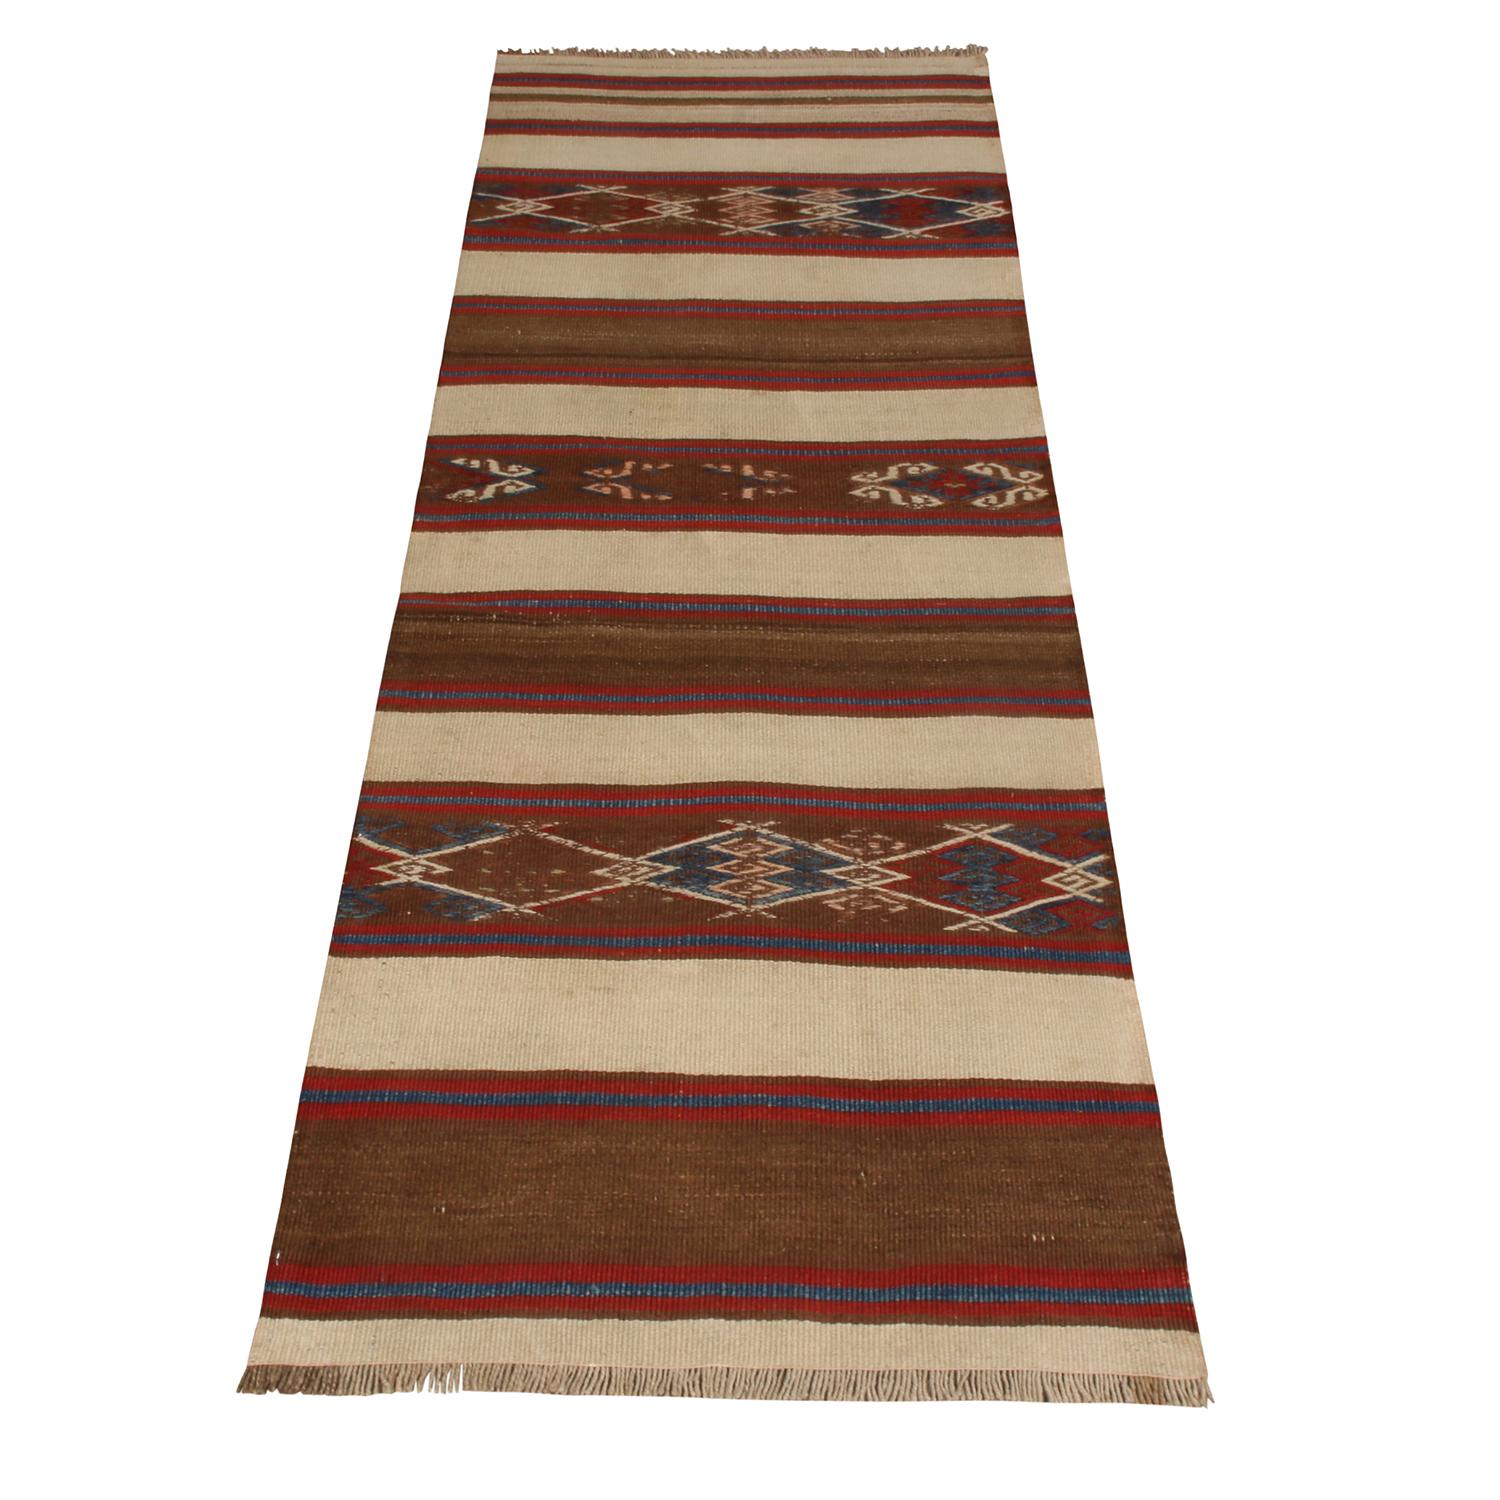 Flat-woven in high-quality wool with naturally dyed yarn originating from Turkey between 1940-1950, this vintage Sivas Kilim runner marries traditionalism and individualism in its approach to color, tastefully balancing the deep Vermillion